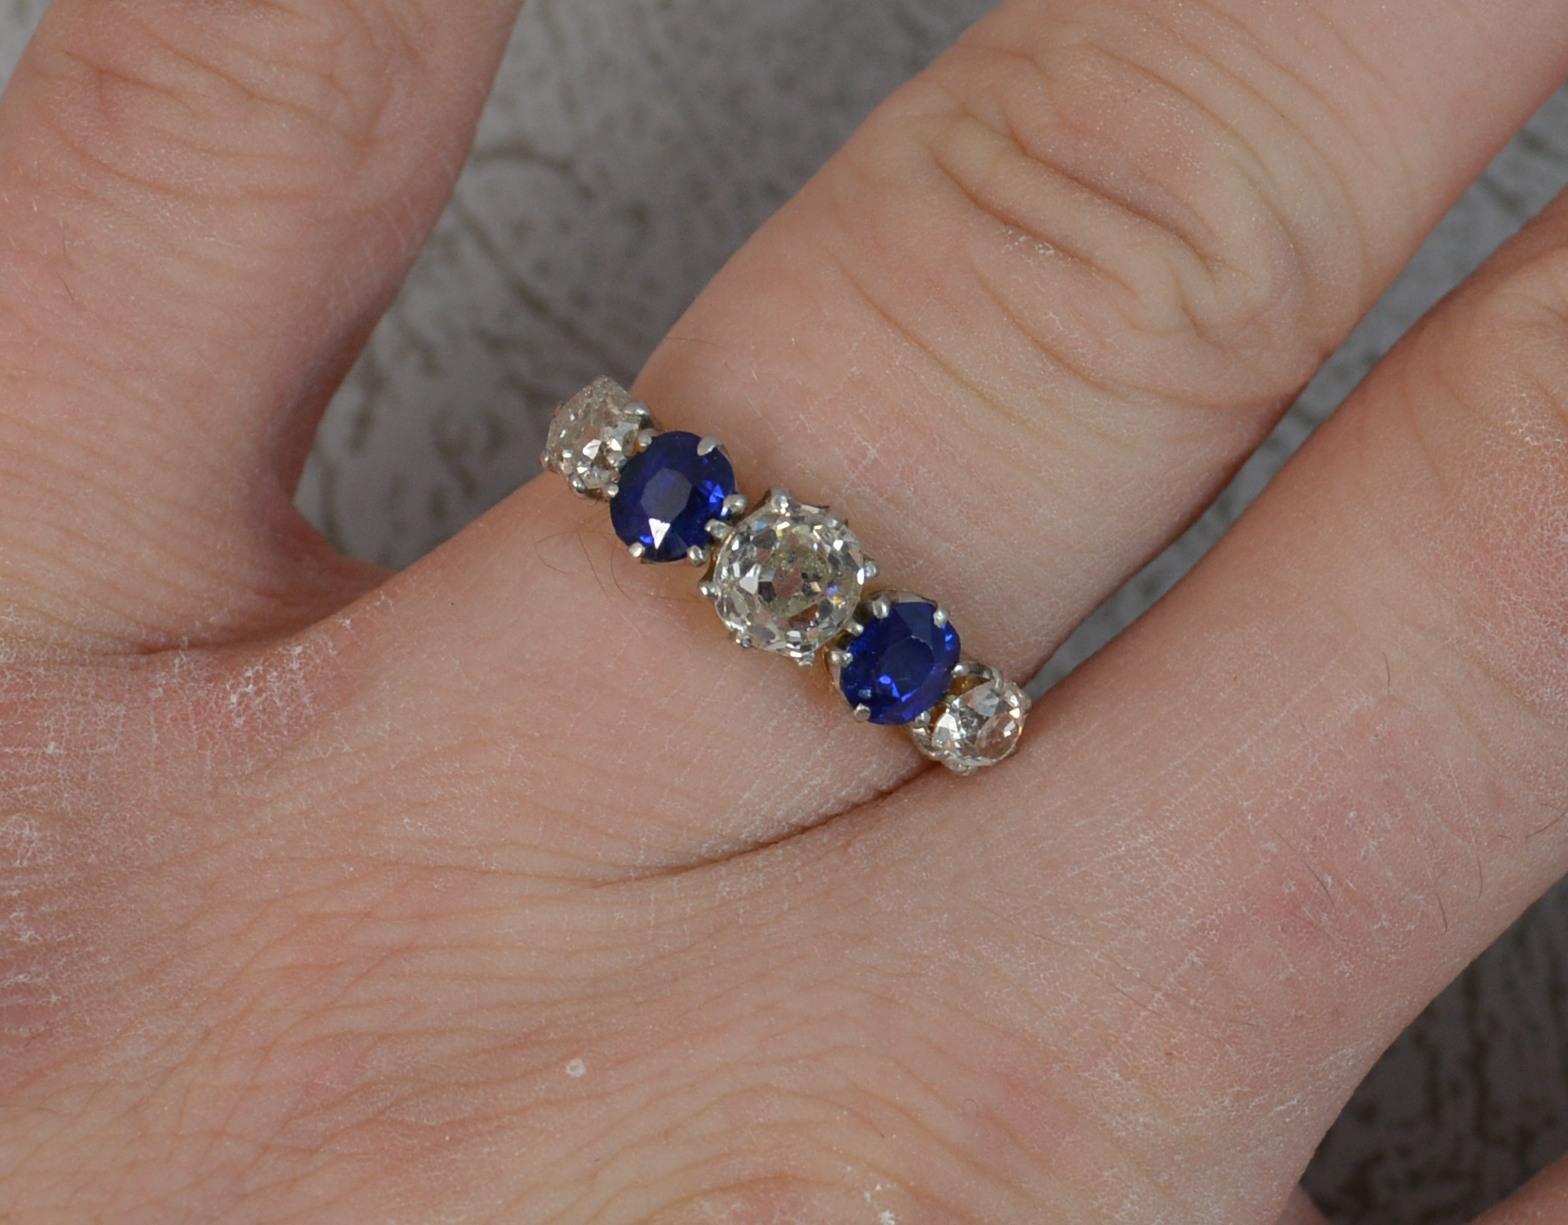 A superb late Victorian era Diamond and Sapphire ring.
SIZE ; L UK, 5 3/4 US
18 carat yellow gold shank and platinum claw head setting.
Five stone design, three natural old cut diamonds to total 1.2 carats with a blue sapphire in between. 20mm